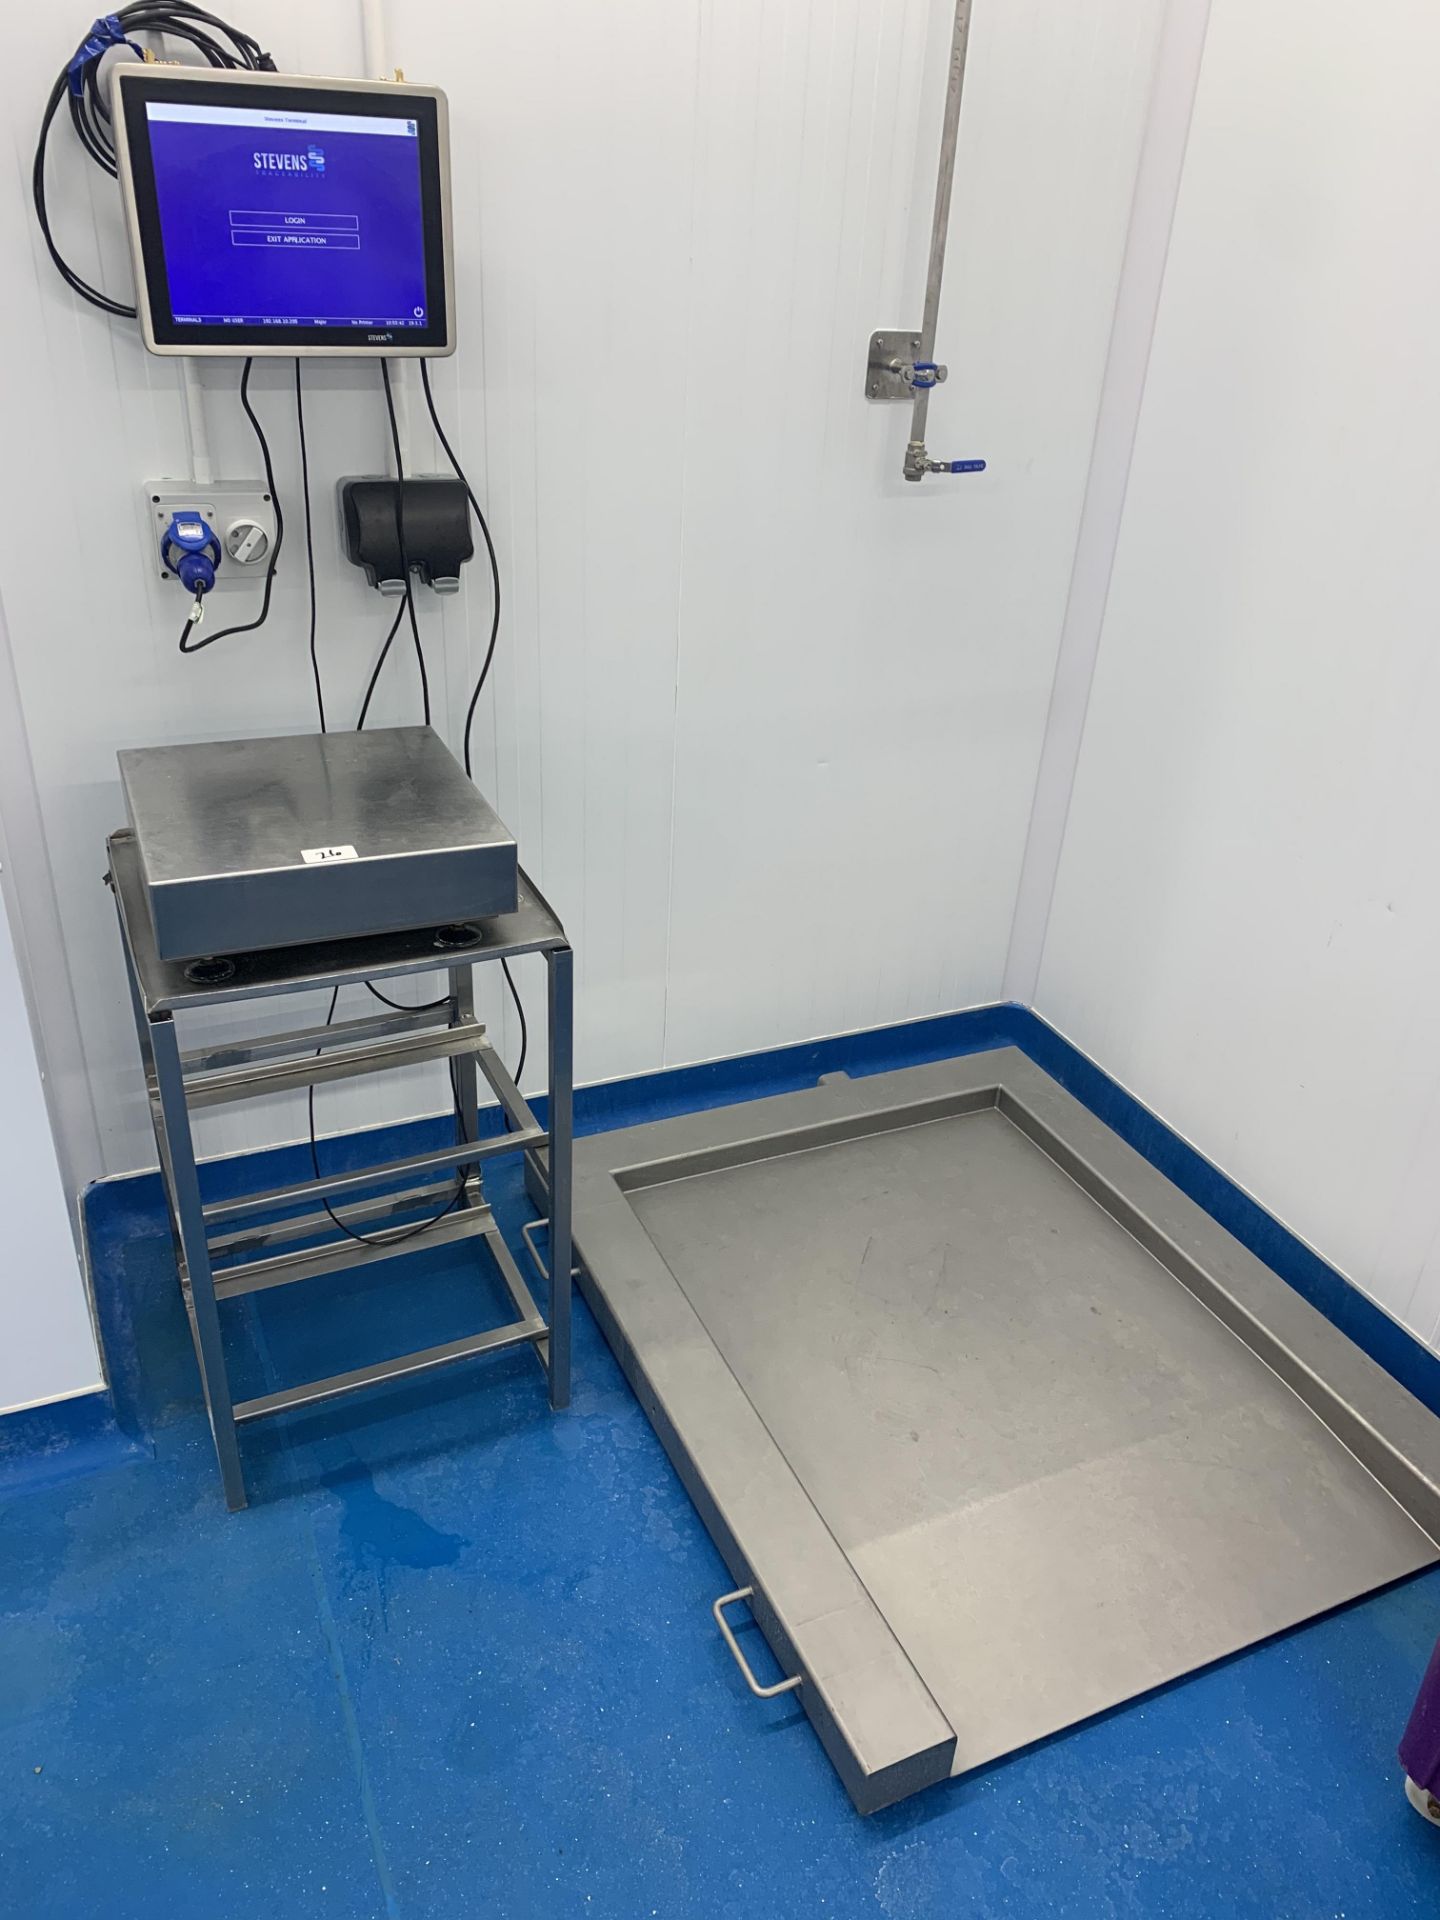 Stevens digital display weighing system drive in platform 800 x 110 mm capacity and table top scale